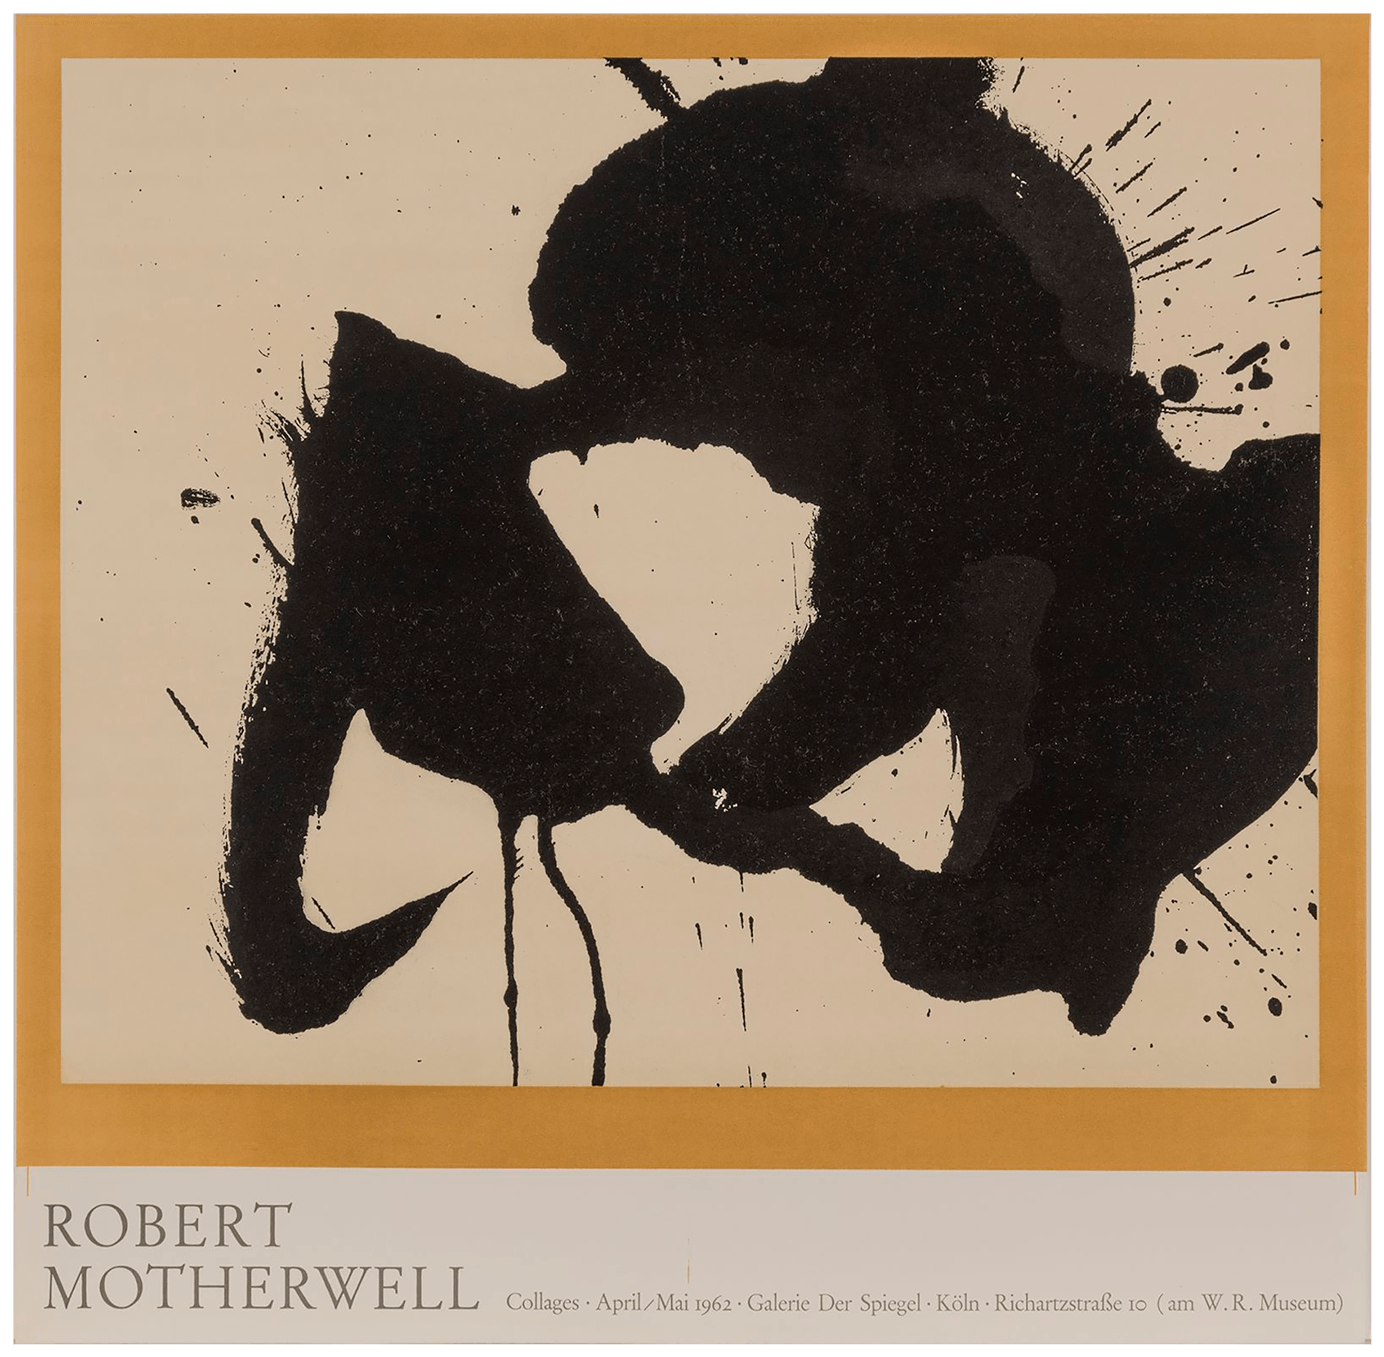 Exhibition poster for Robert Motherwell: Collages, 1962. Features a black ink drawing on an ochre background.